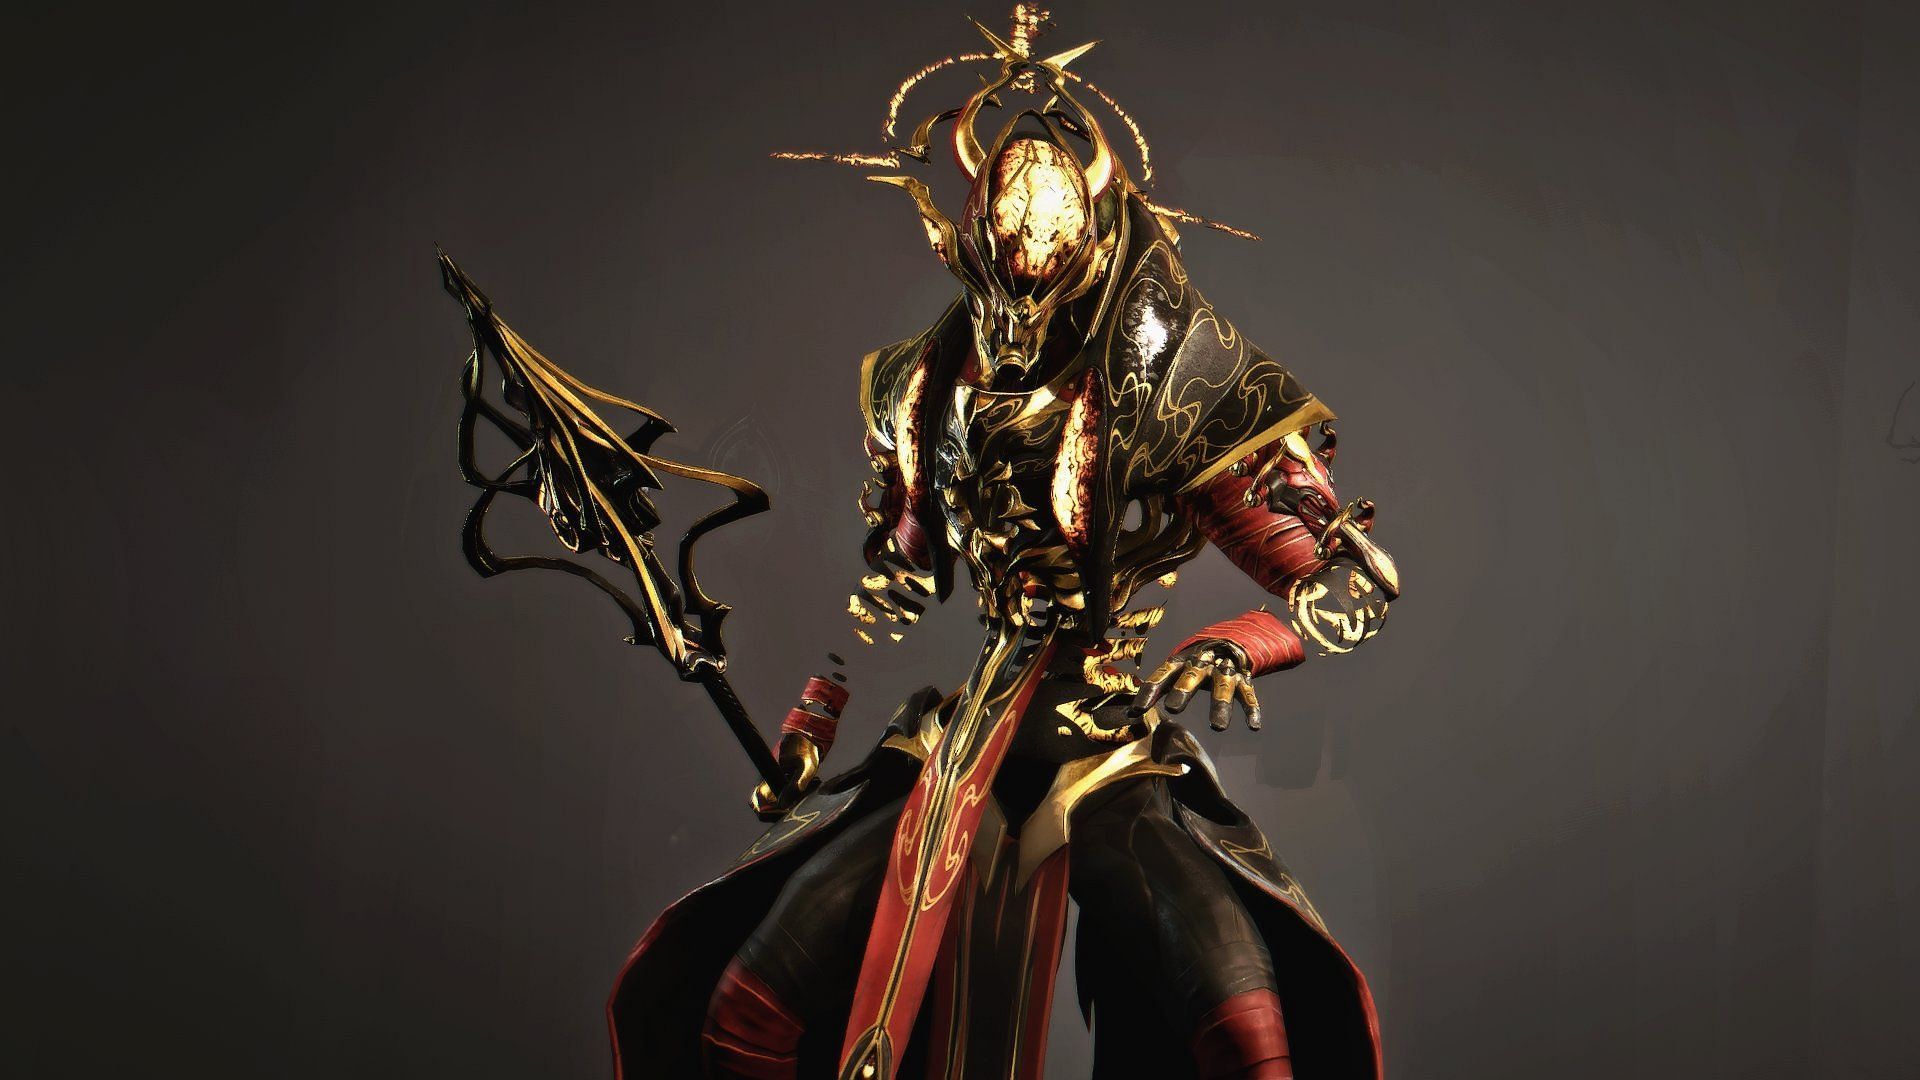 Harrow can make his allies invulnerable with his ultimate ability (Image via Digital Extremes)